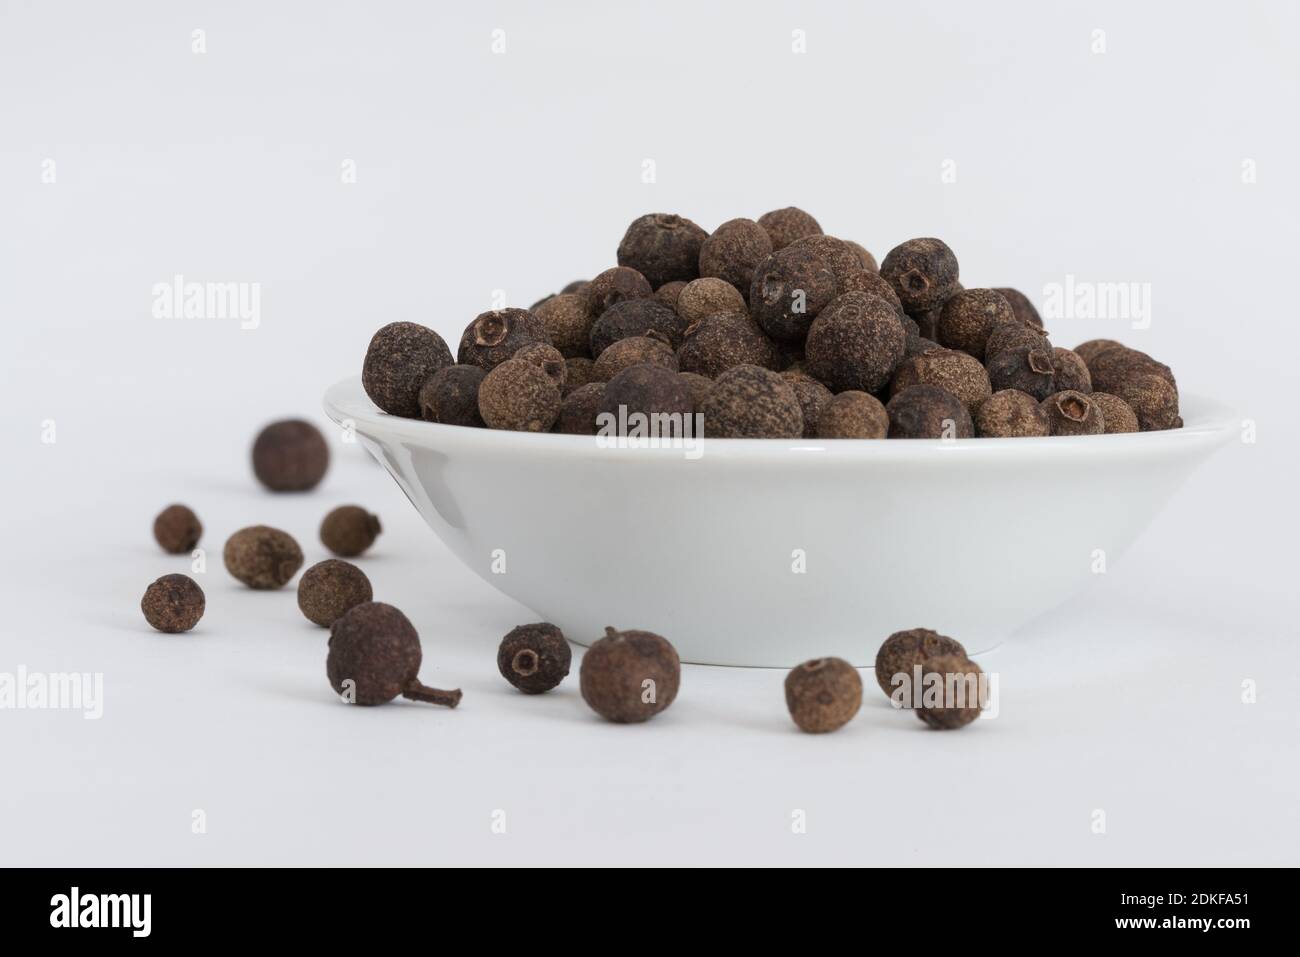 Seeds In Bowl Against White Background Stock Photo